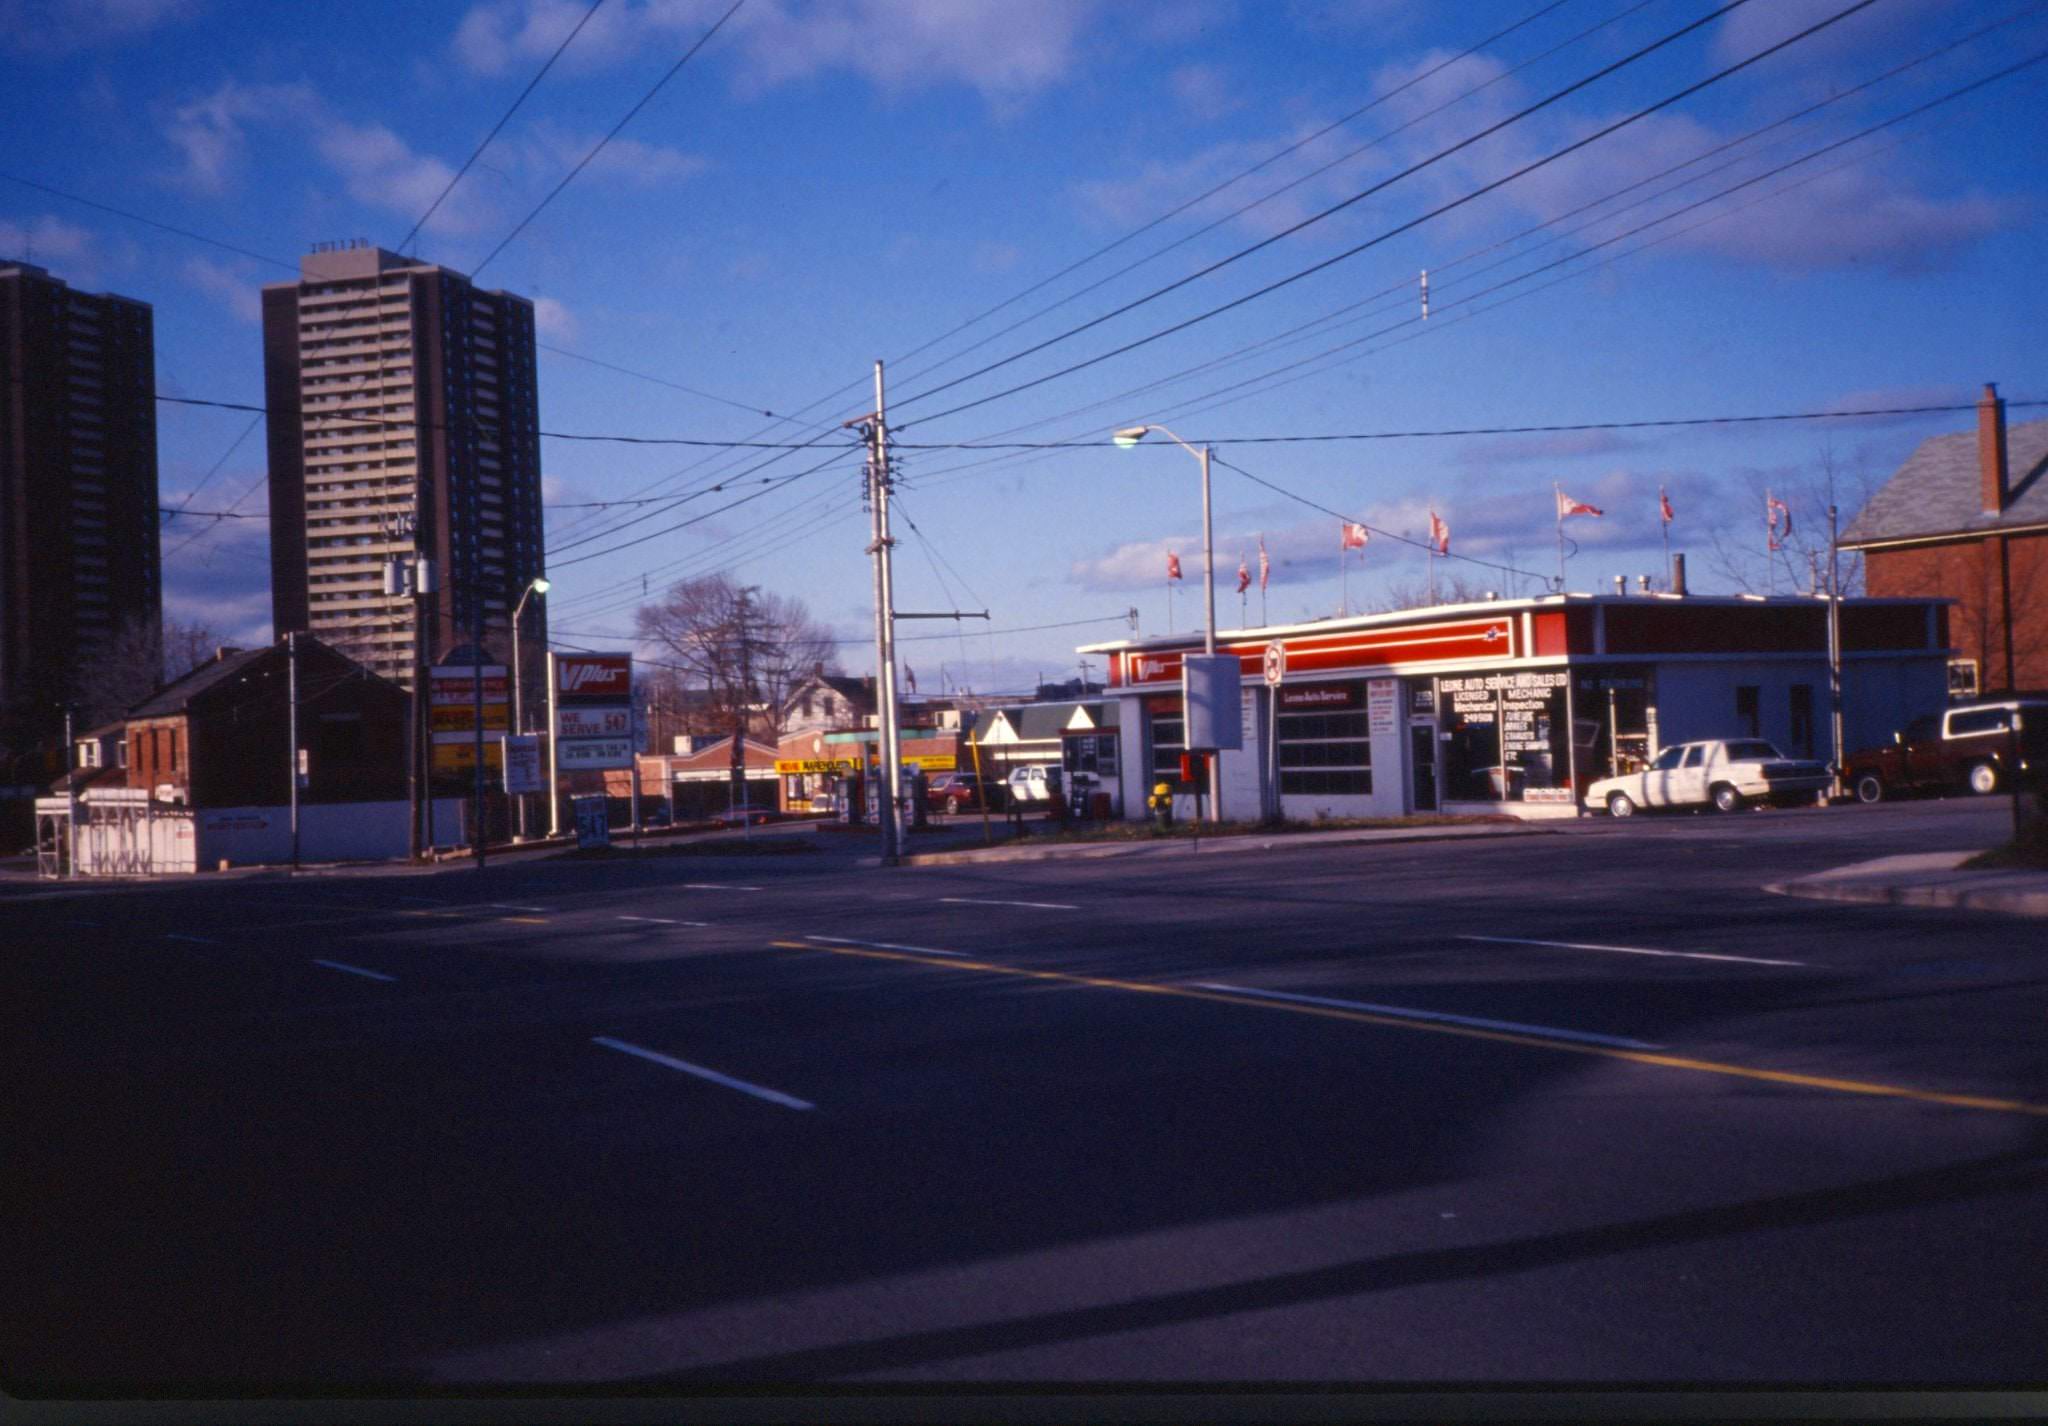 Similar view of the service station at Weston Road and Parke 1991